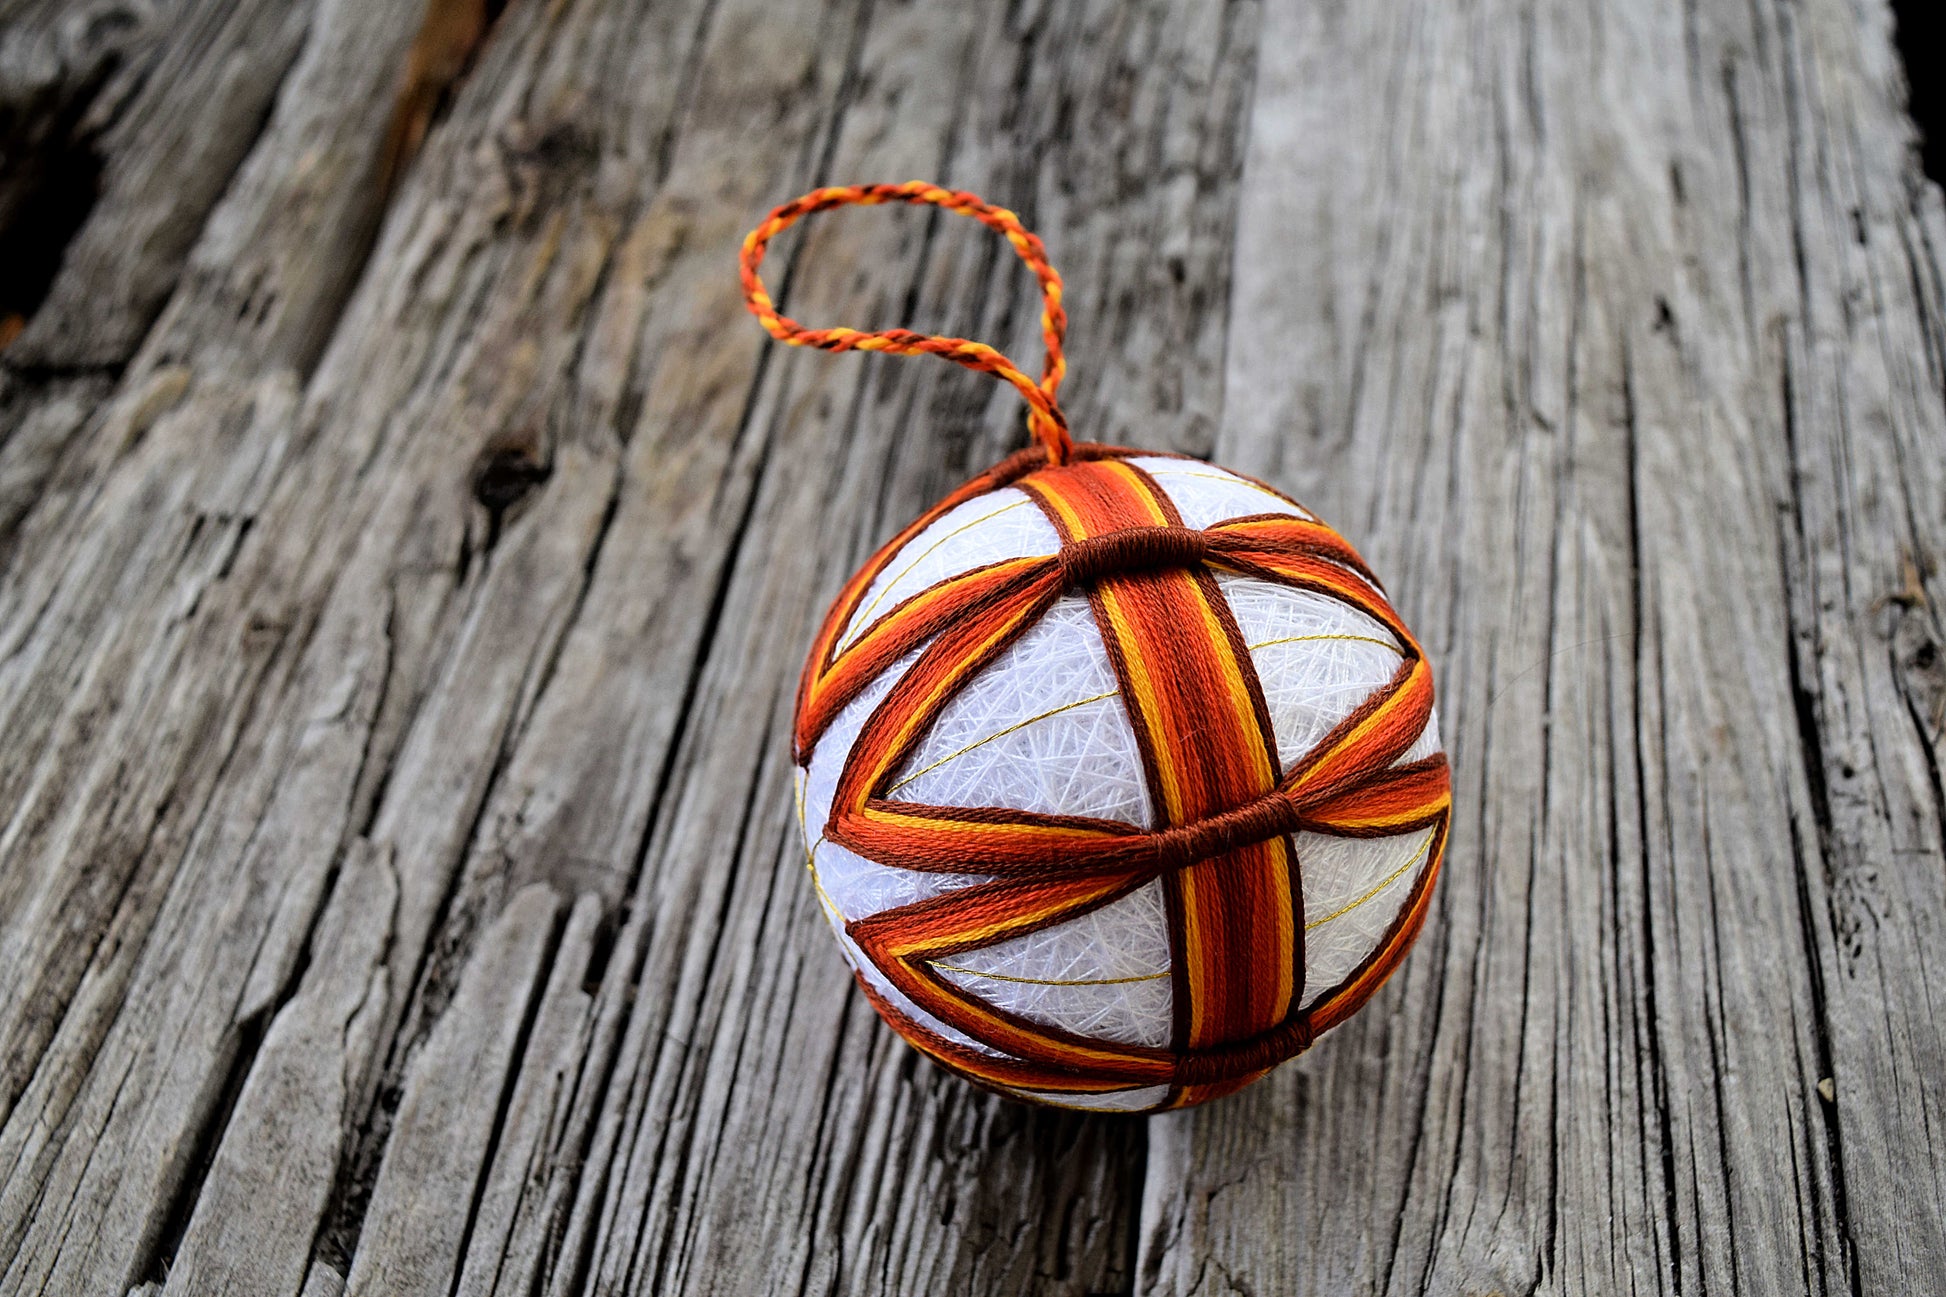 Side view of rust and brown jyouge douji temari showing thread wraps